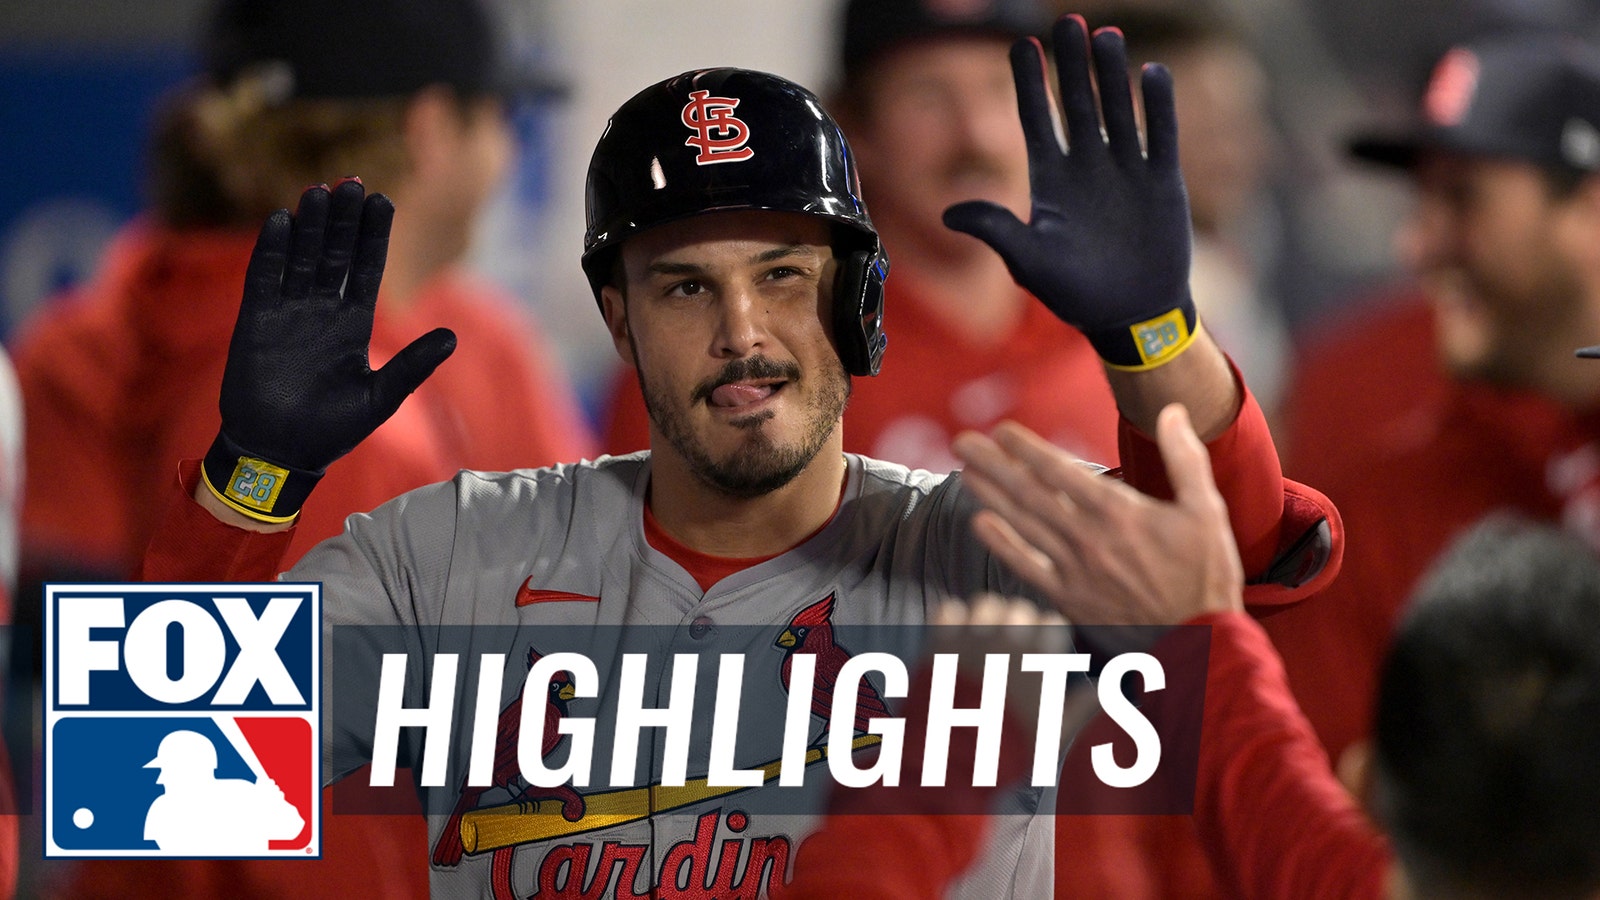 Highlights from Cardinals' win vs. Angels